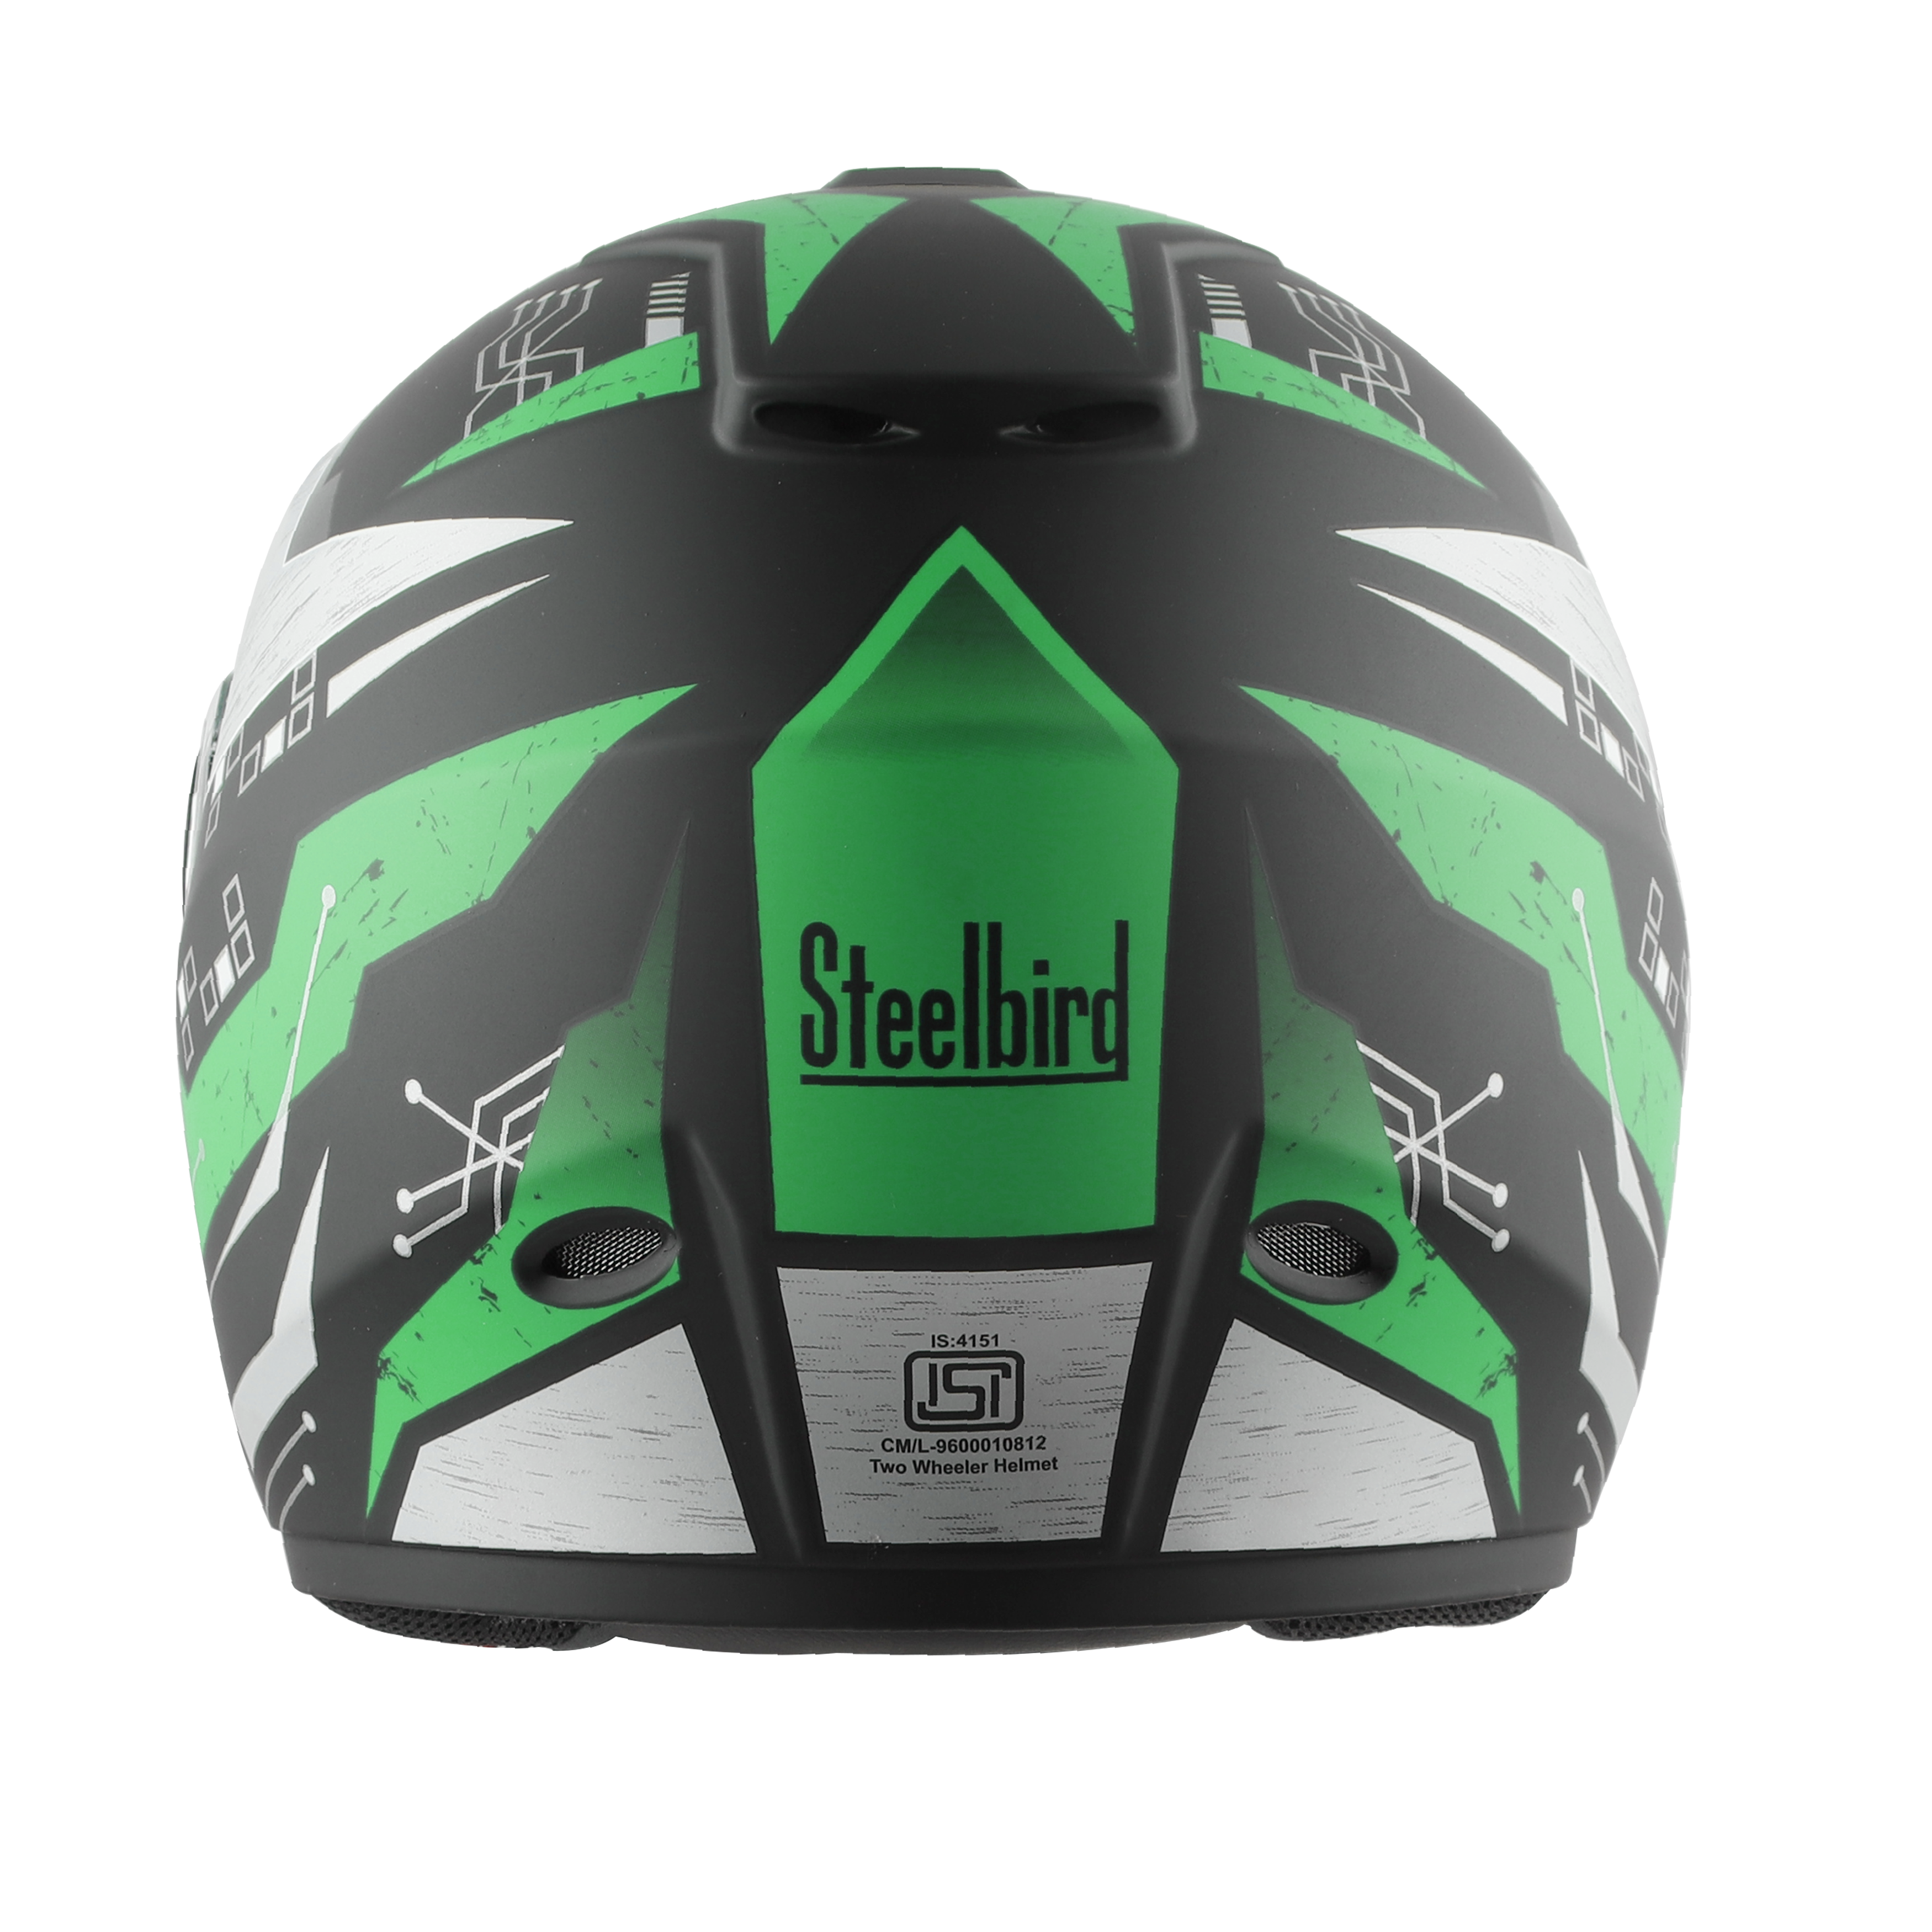 SBH-11 ZOOM RACING GLOSSY BLACK WITH FLUO GREEN